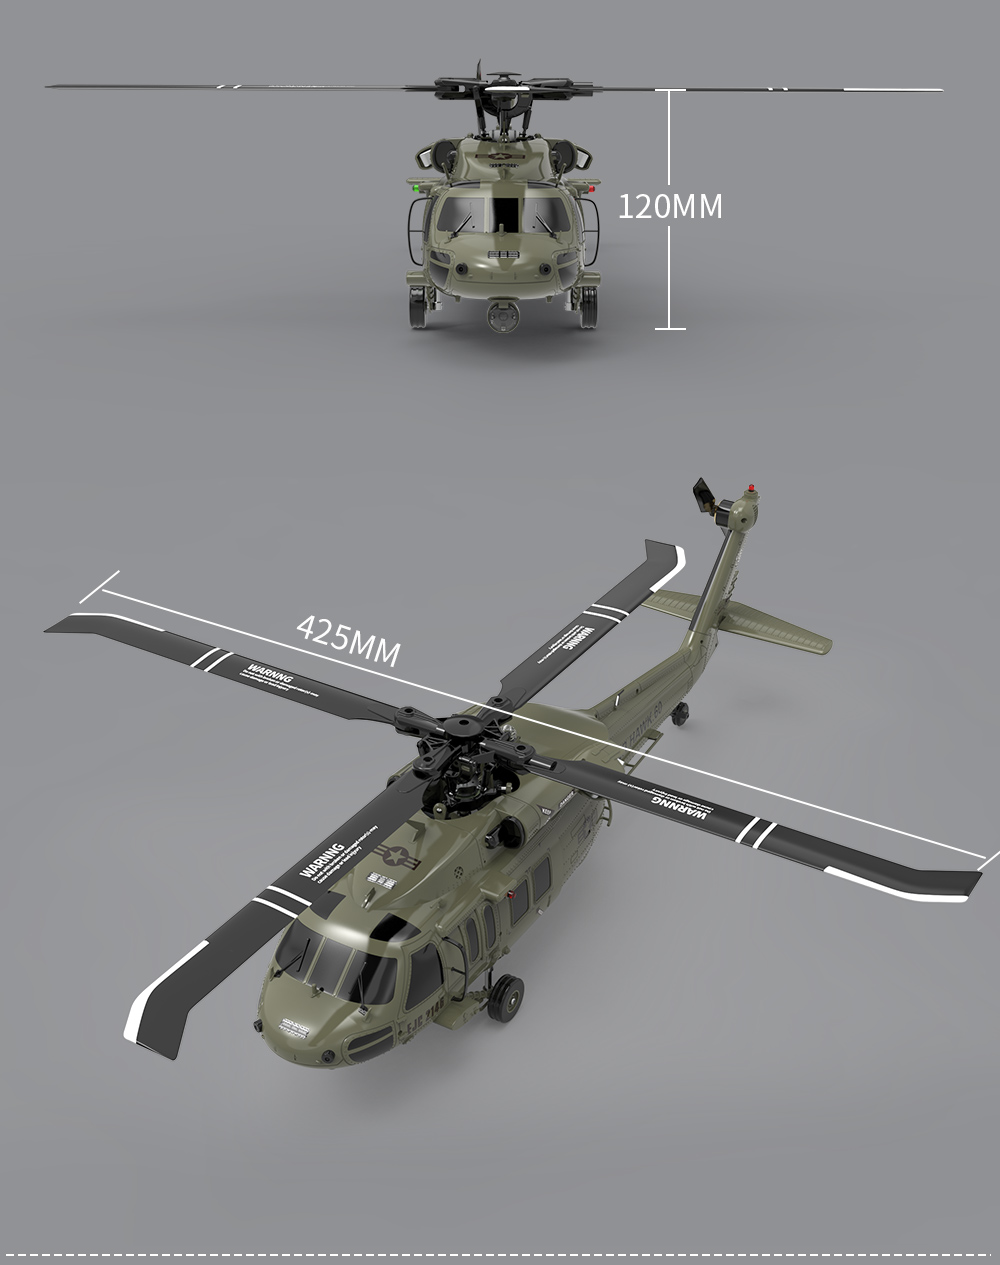 UH-60 Black Hawk RC Military Helicopter (military choppers, chinook military helicopters, british army helicopters)